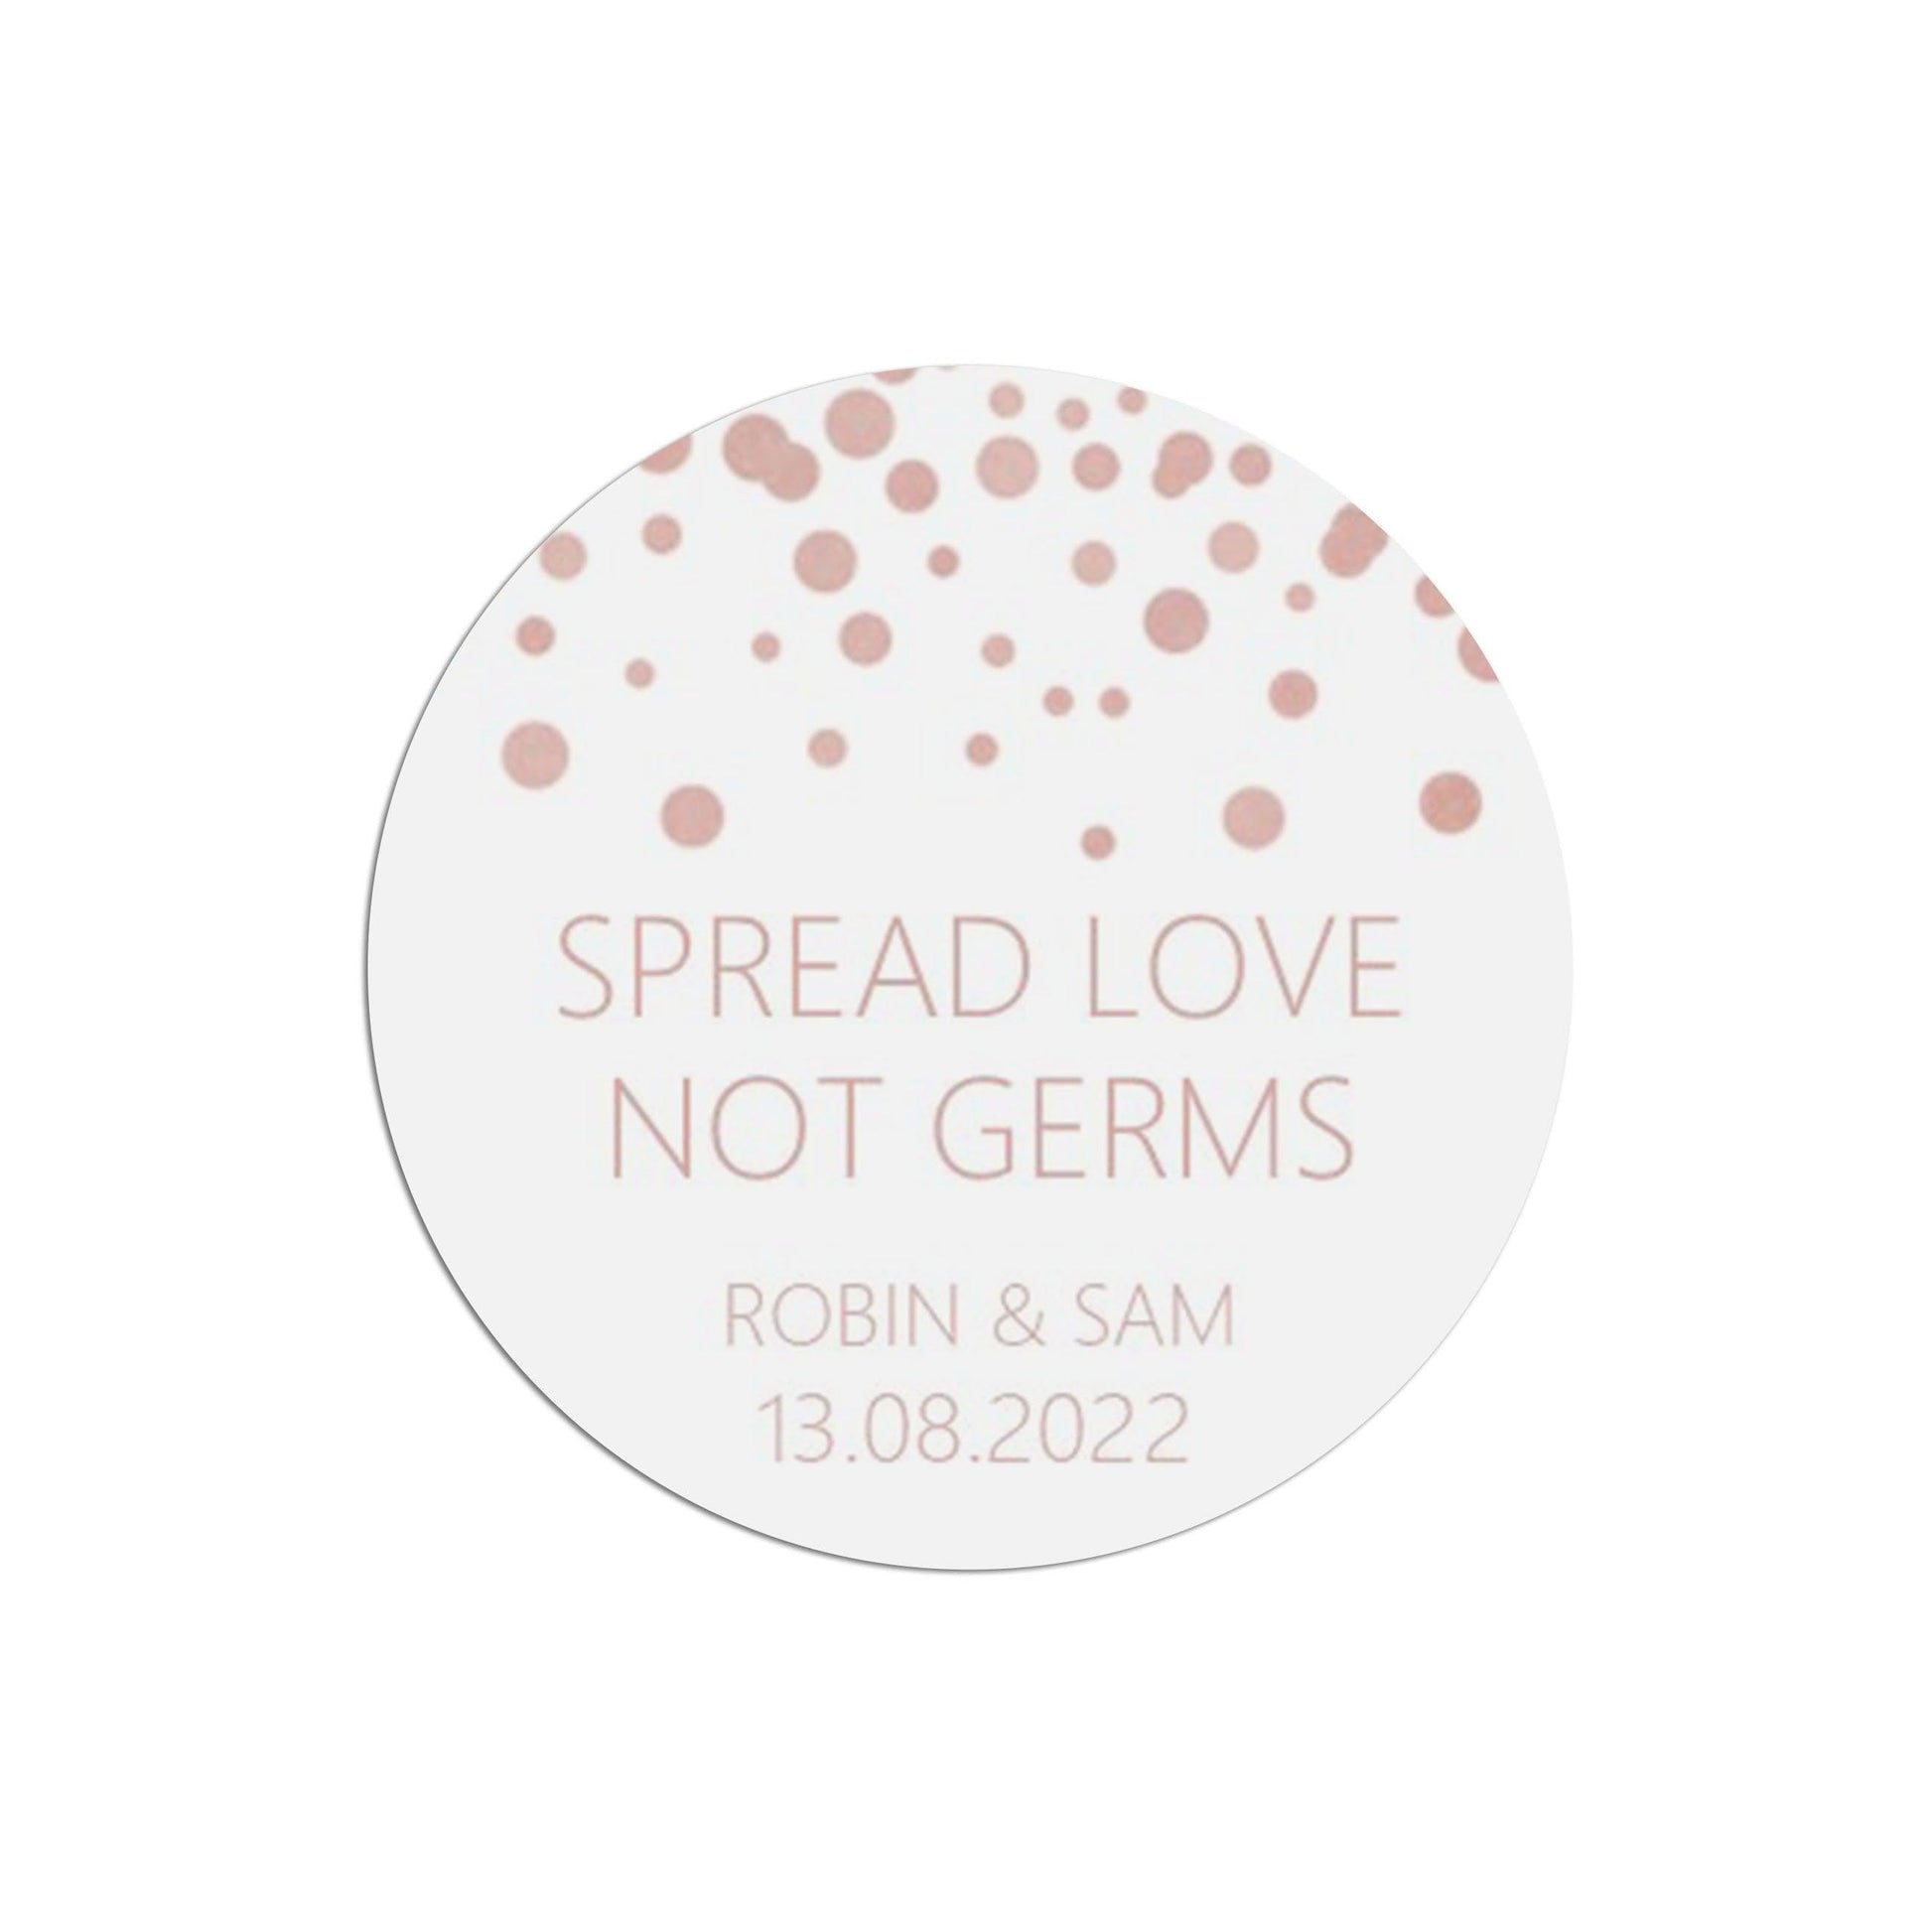  Spread Love Not Germs Wedding Stickers, Blush Confetti 37mm Round Personalised x 35 Stickers Per Sheet by PMPRINTED 